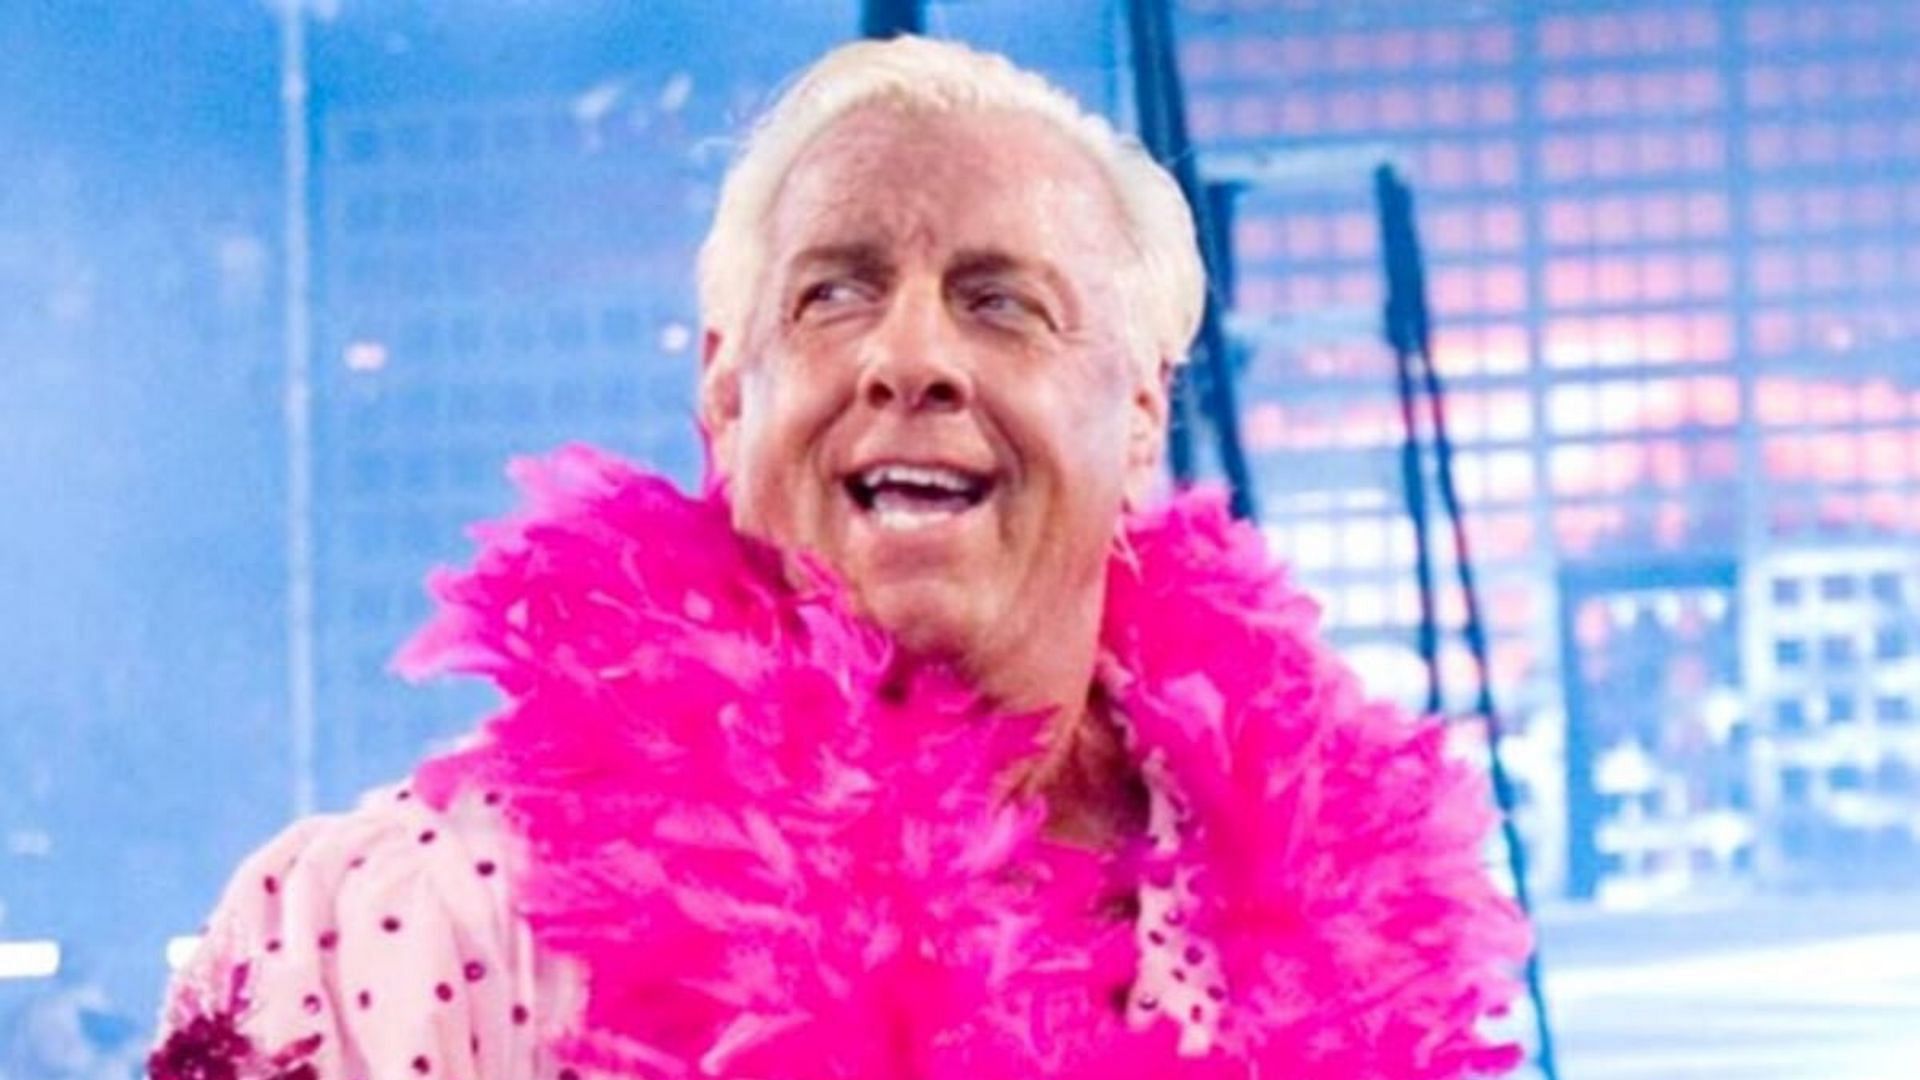 Ric Flair at WrestleMania 22 in 2006